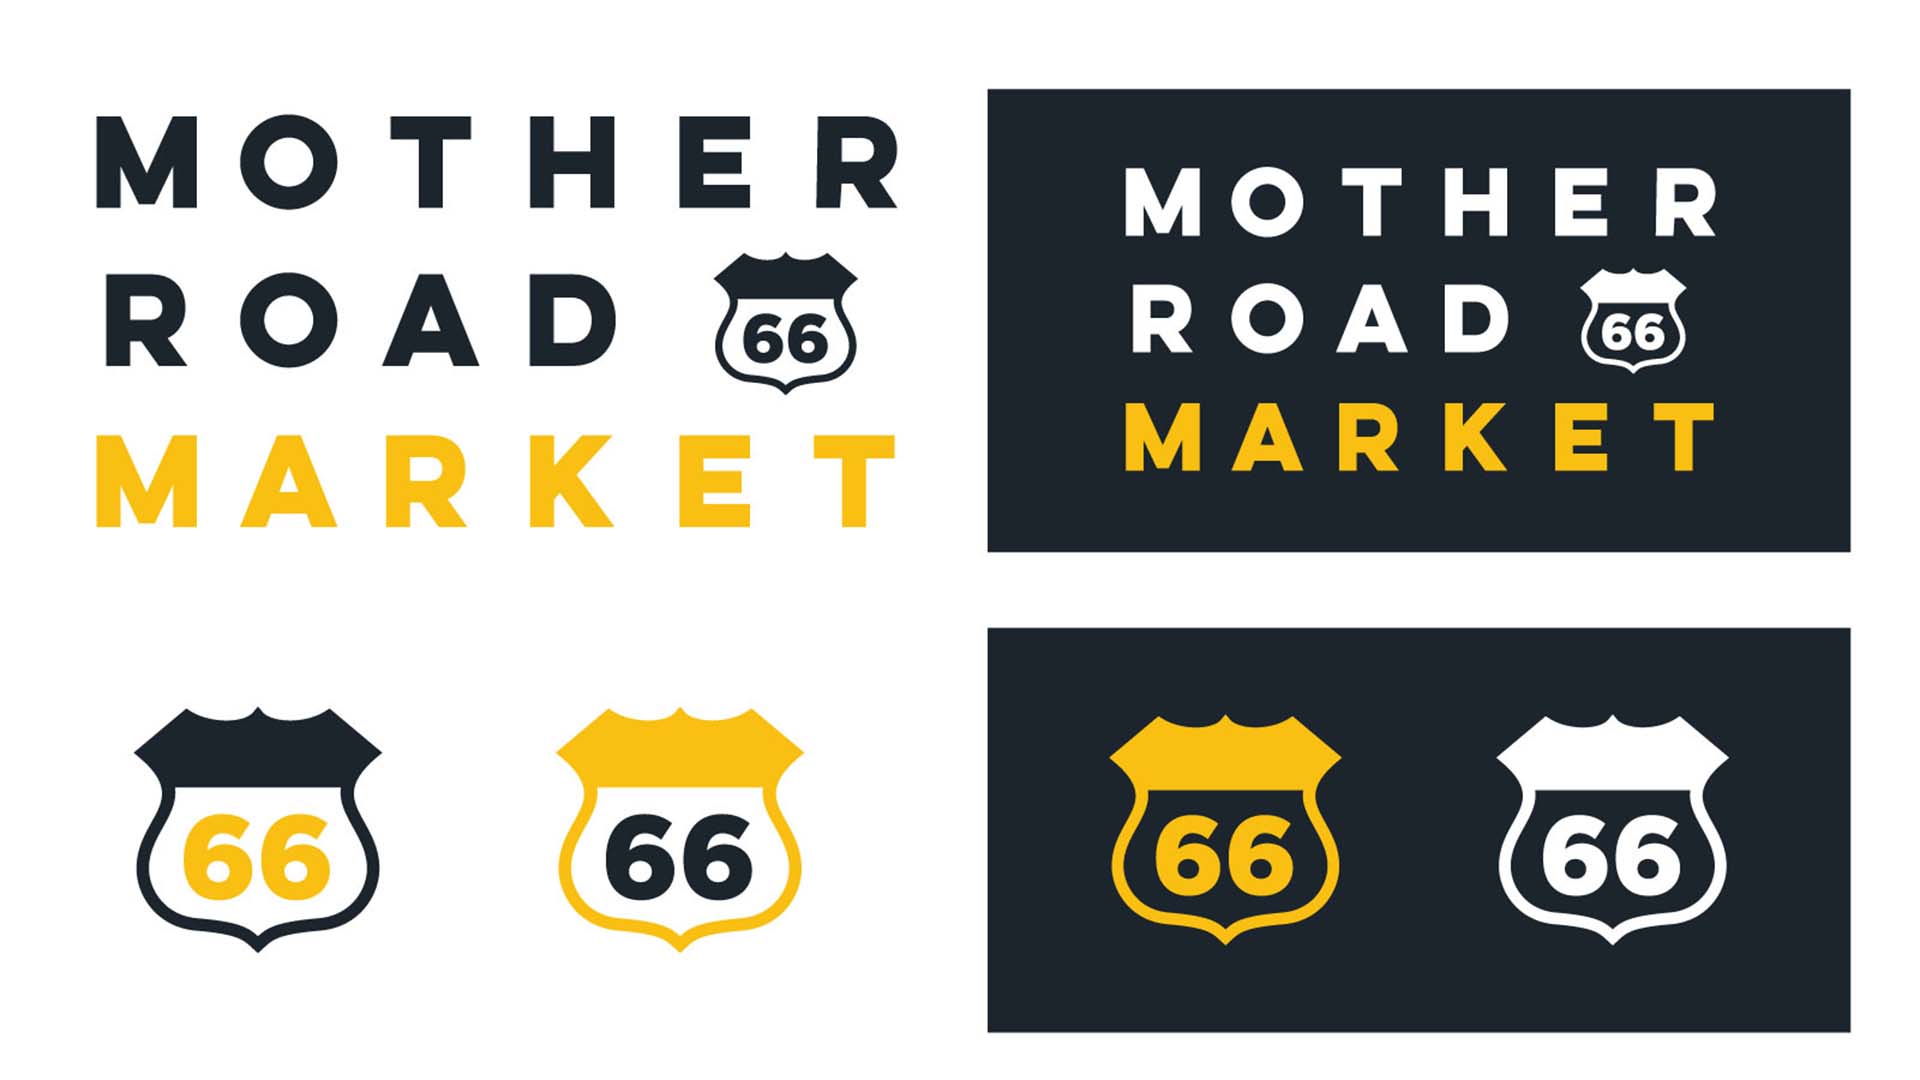 Branding and creative for Mother Road Market in Tulsa, Oklahoma